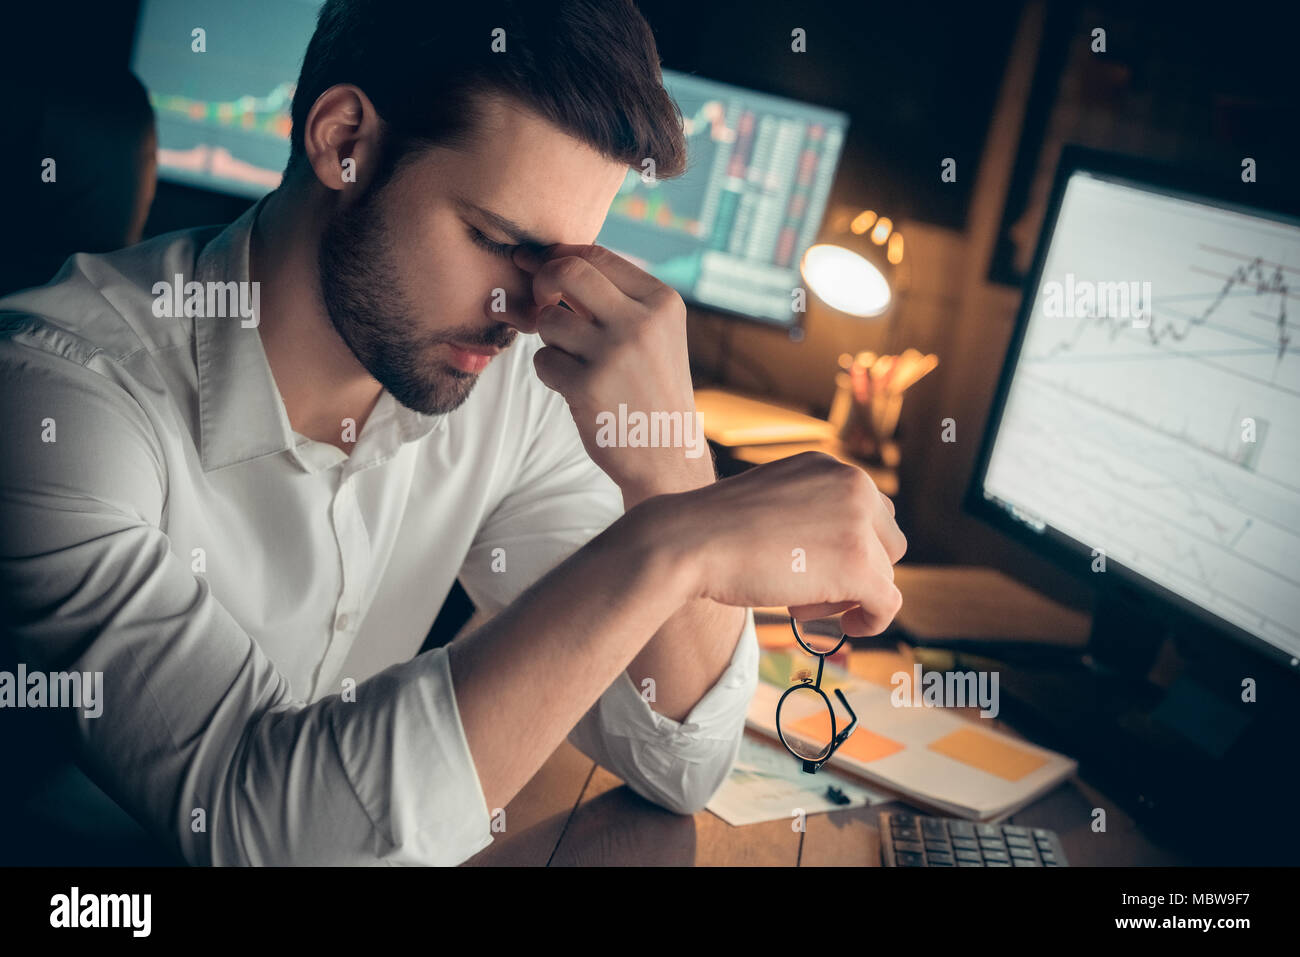 Tired businessman suffers from computer vision syndrome taking off glasses massaging eyes working late, fatigued trader feels eyestrain, has bad blurr Stock Photo